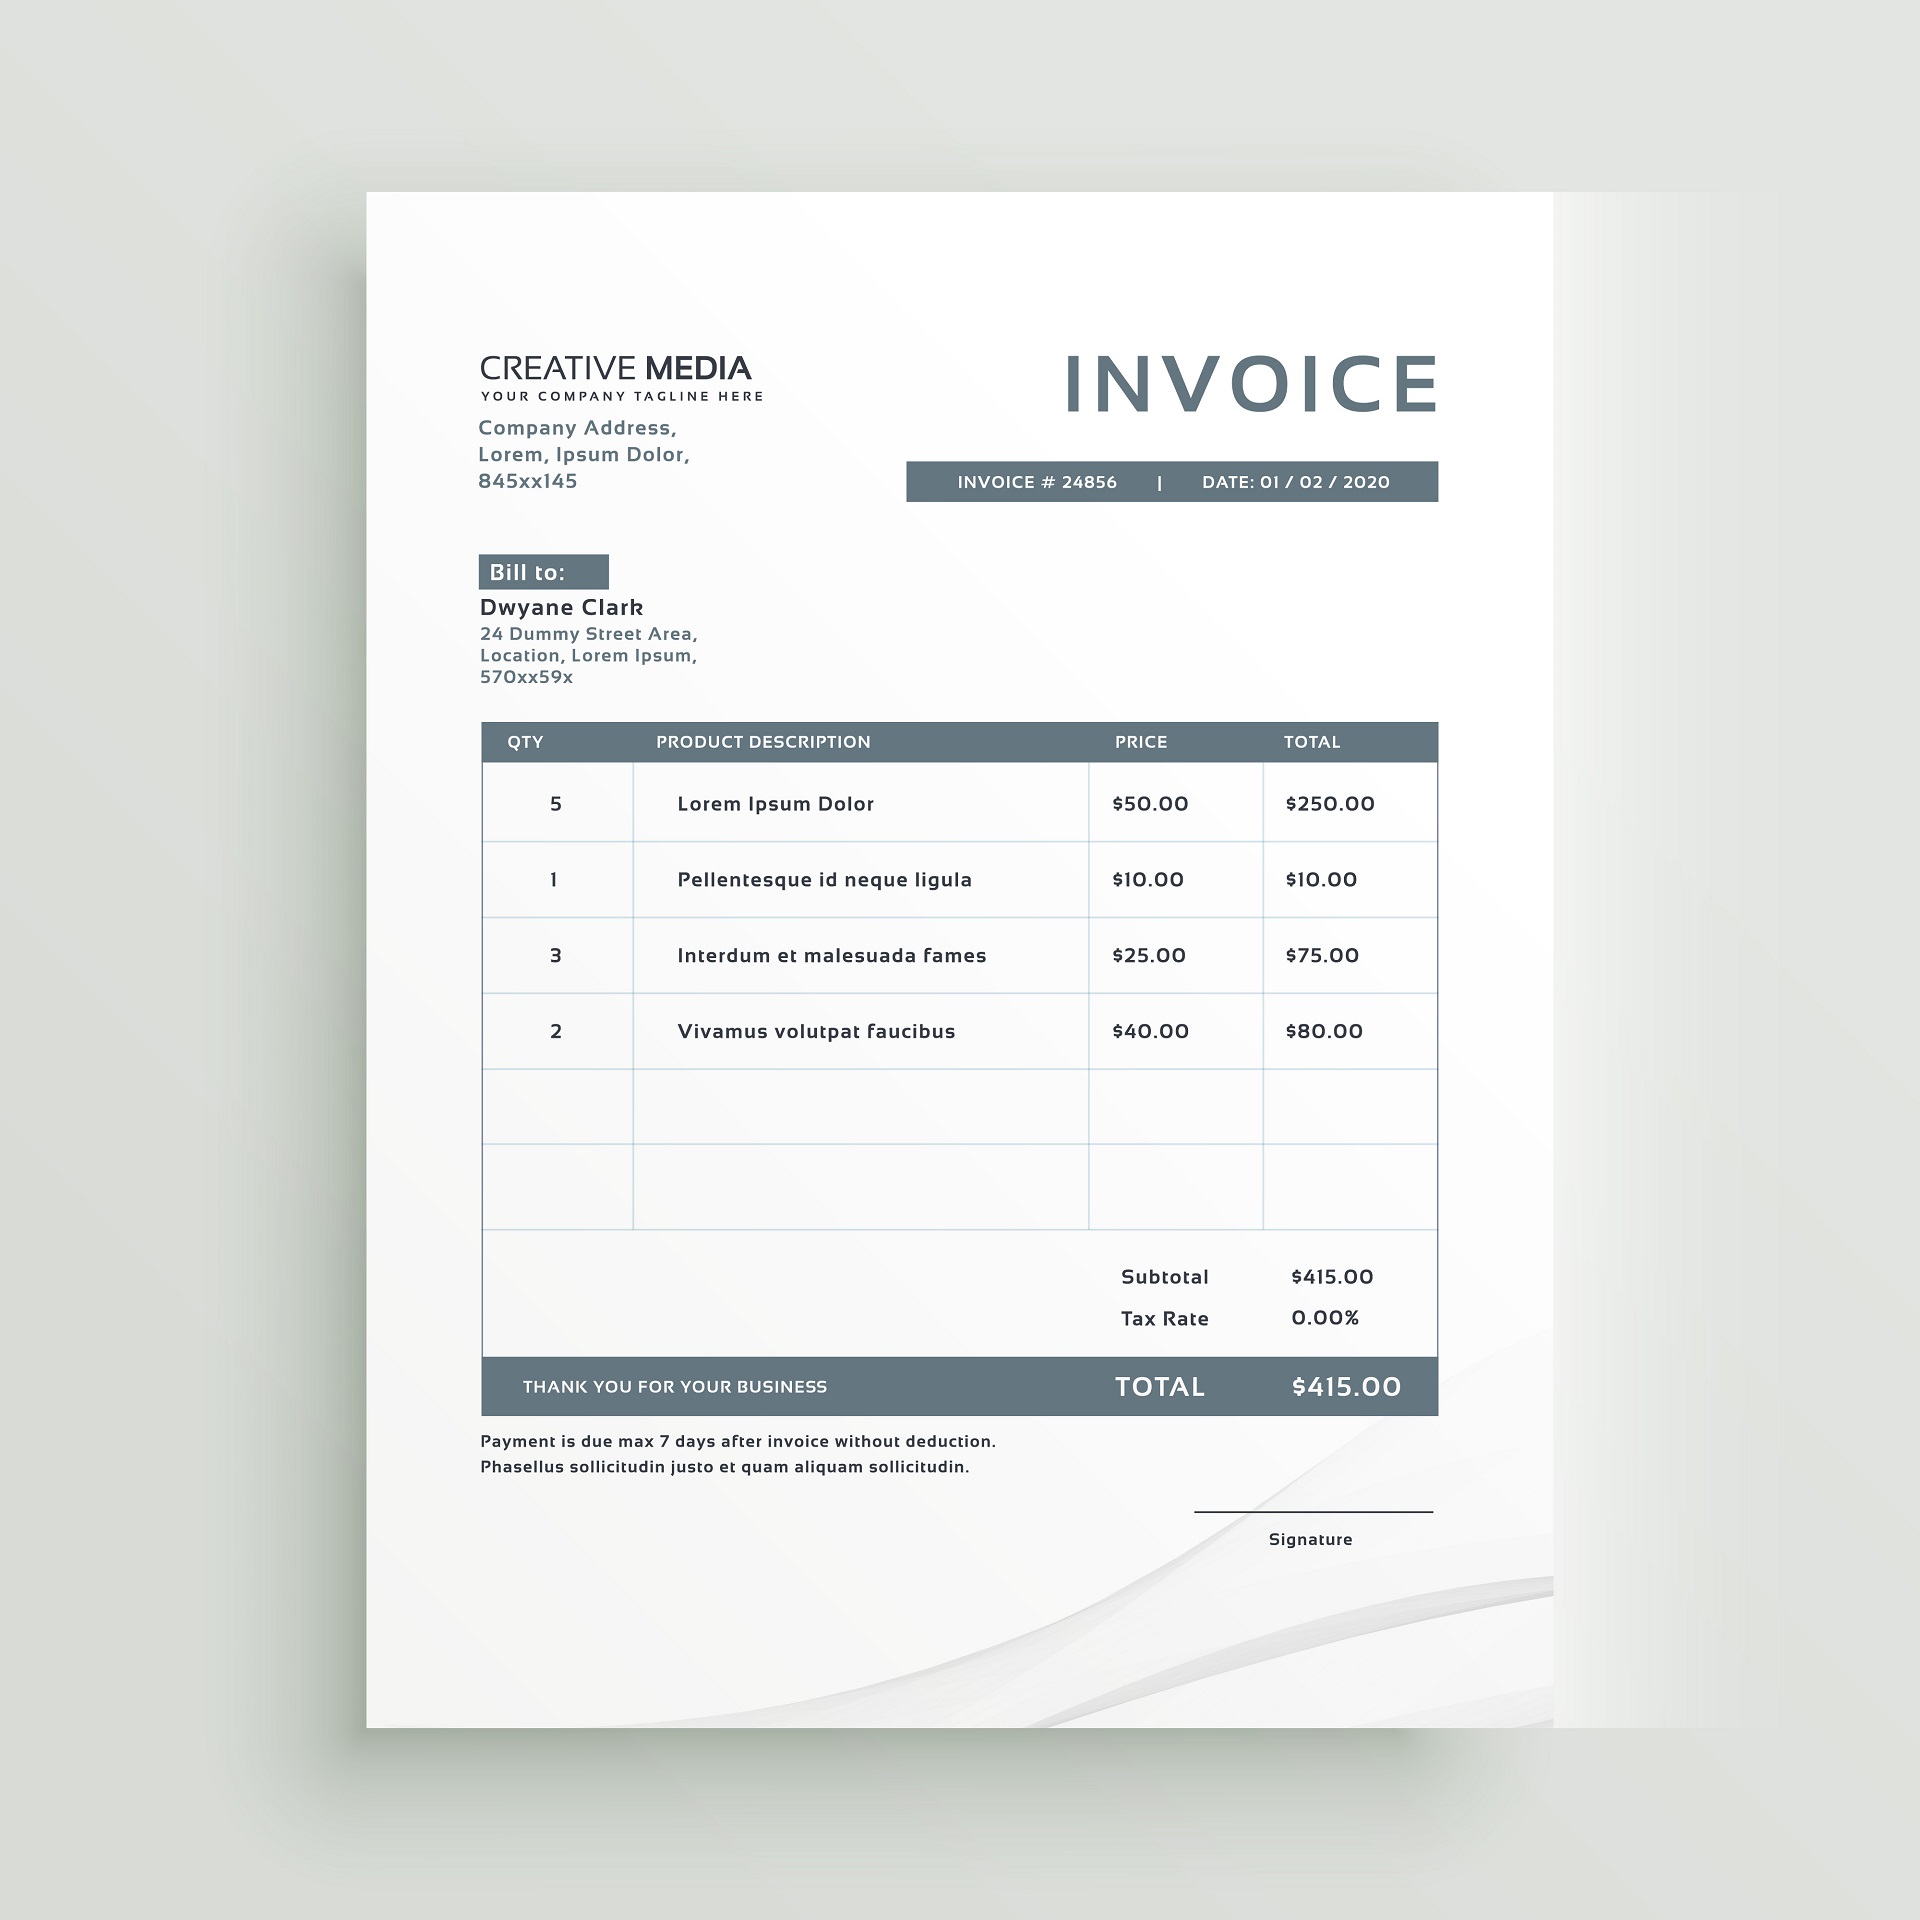 Have the word 'Invoice on top. 